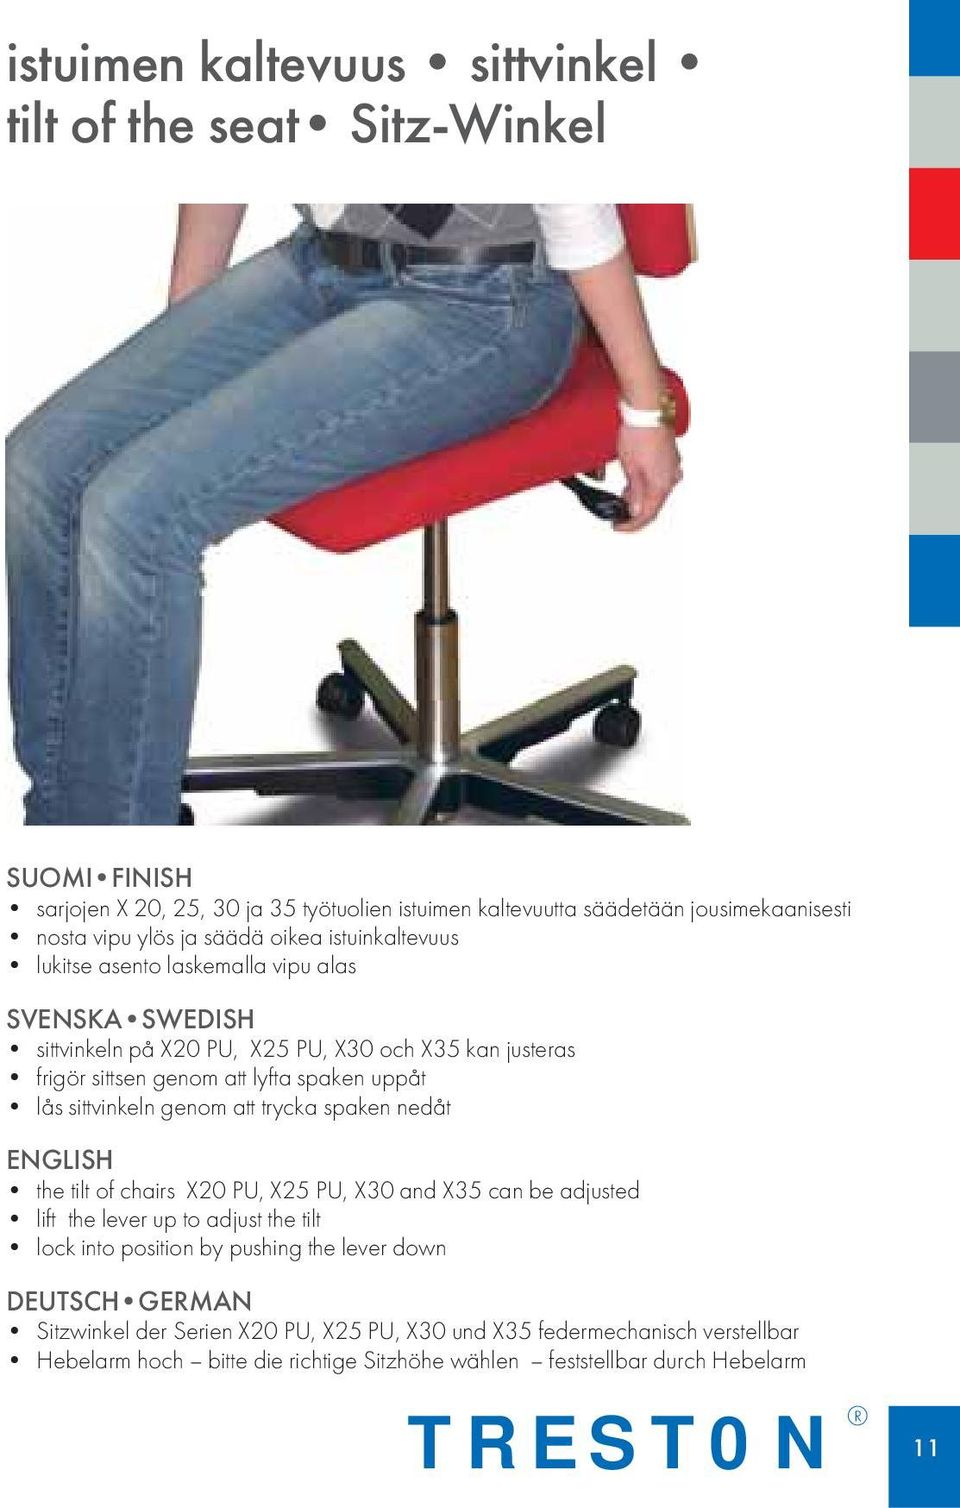 sittvinkeln genom att trycka spaken nedåt the tilt of chairs X20 PU, X25 PU, X30 and X35 can be adjusted lift the lever up to adjust the tilt lock into position by pushing